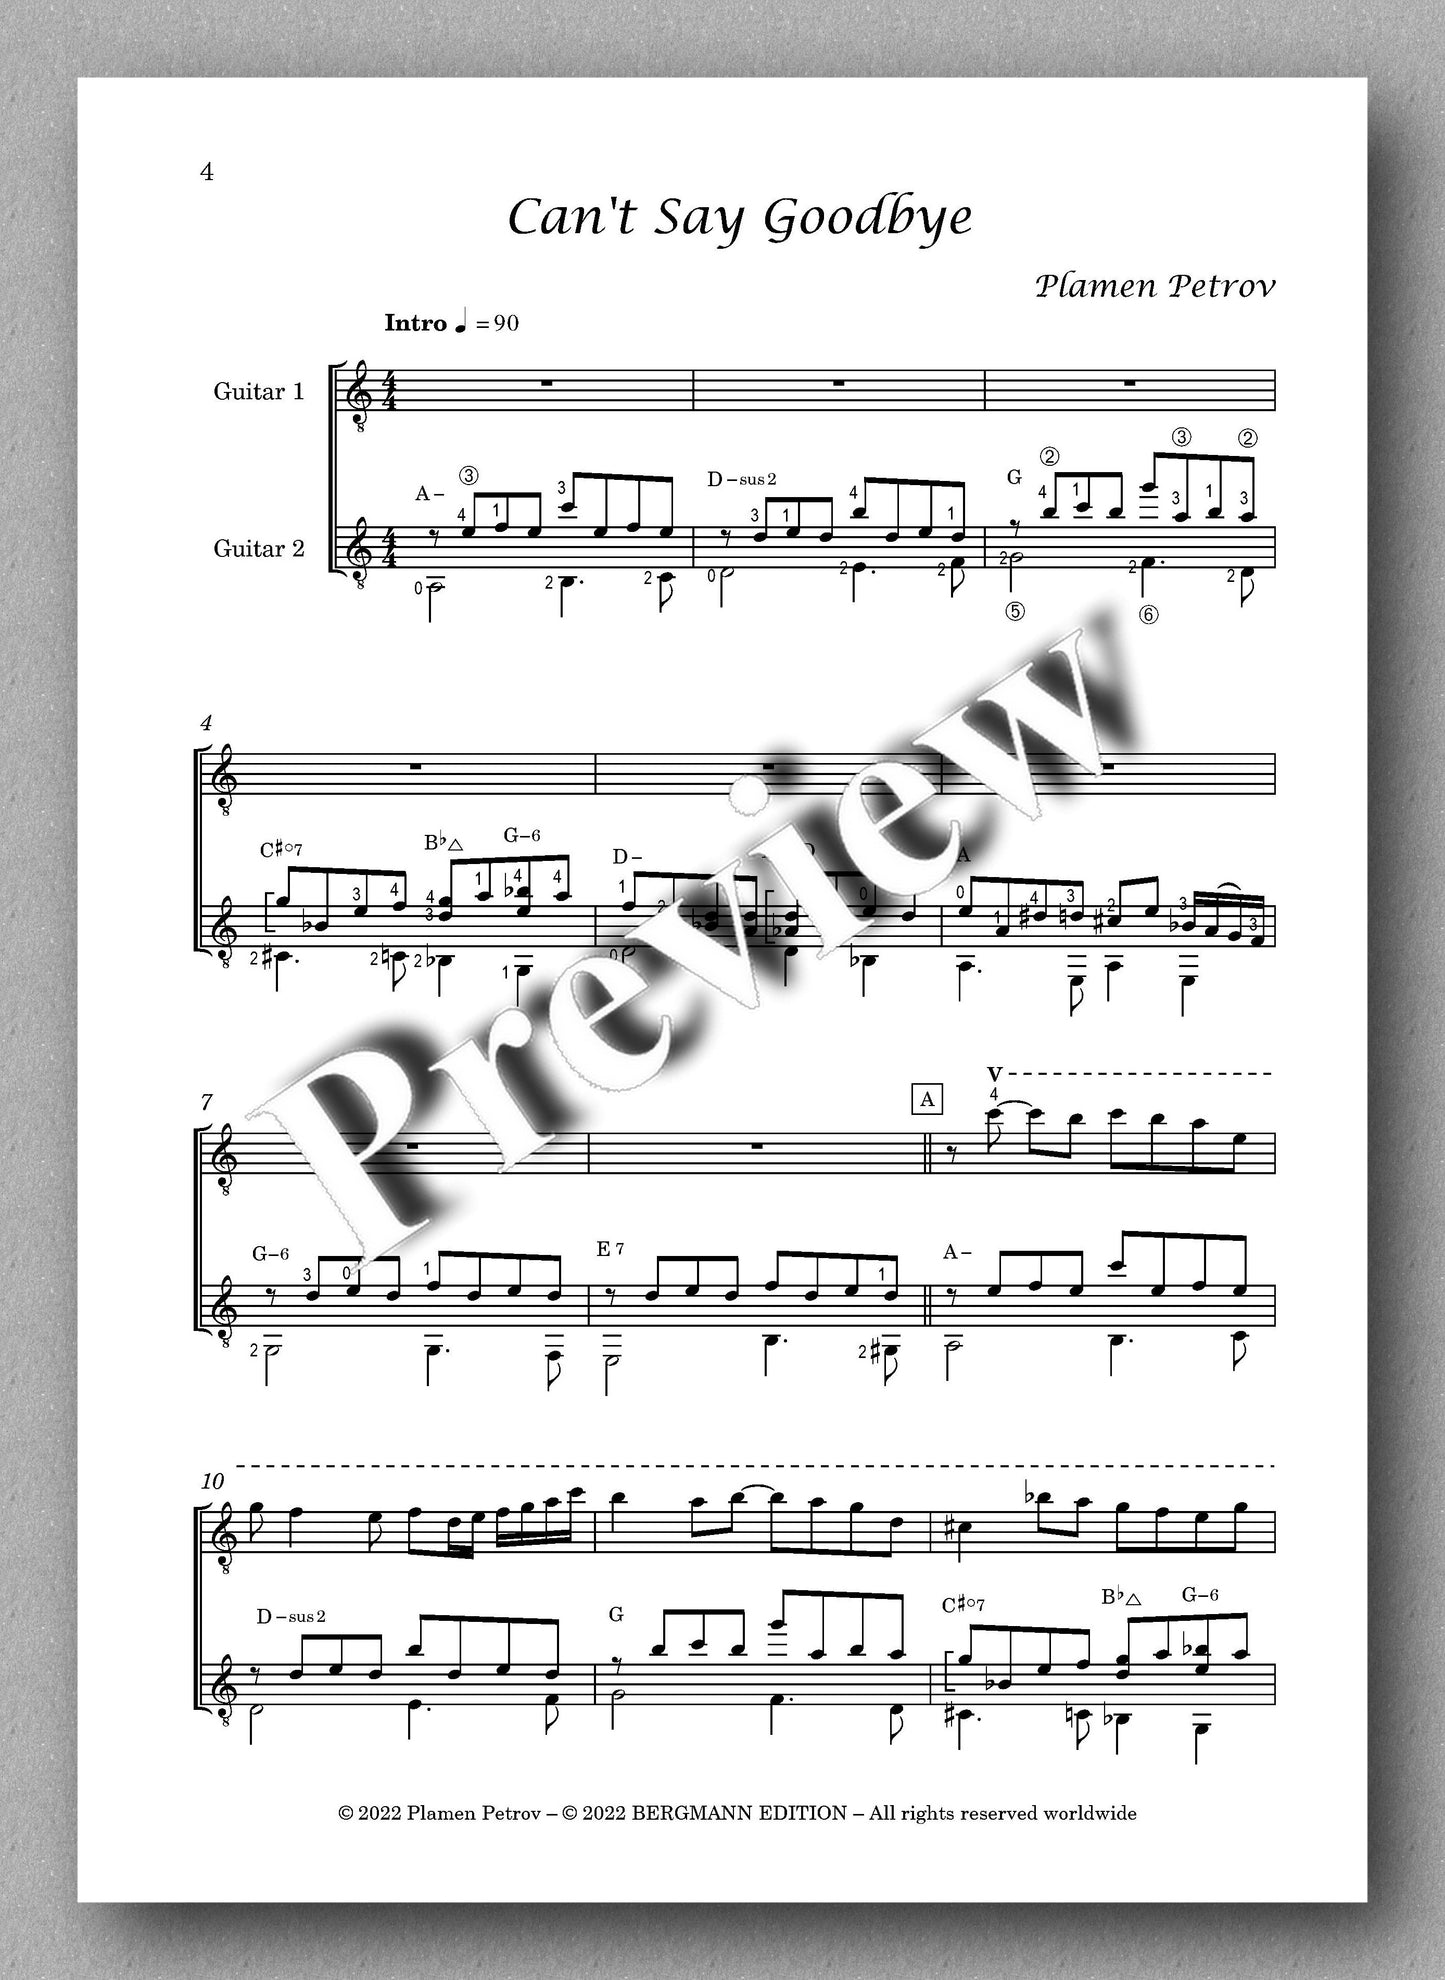 Petrov, Can't Say Goodbye - music score 1